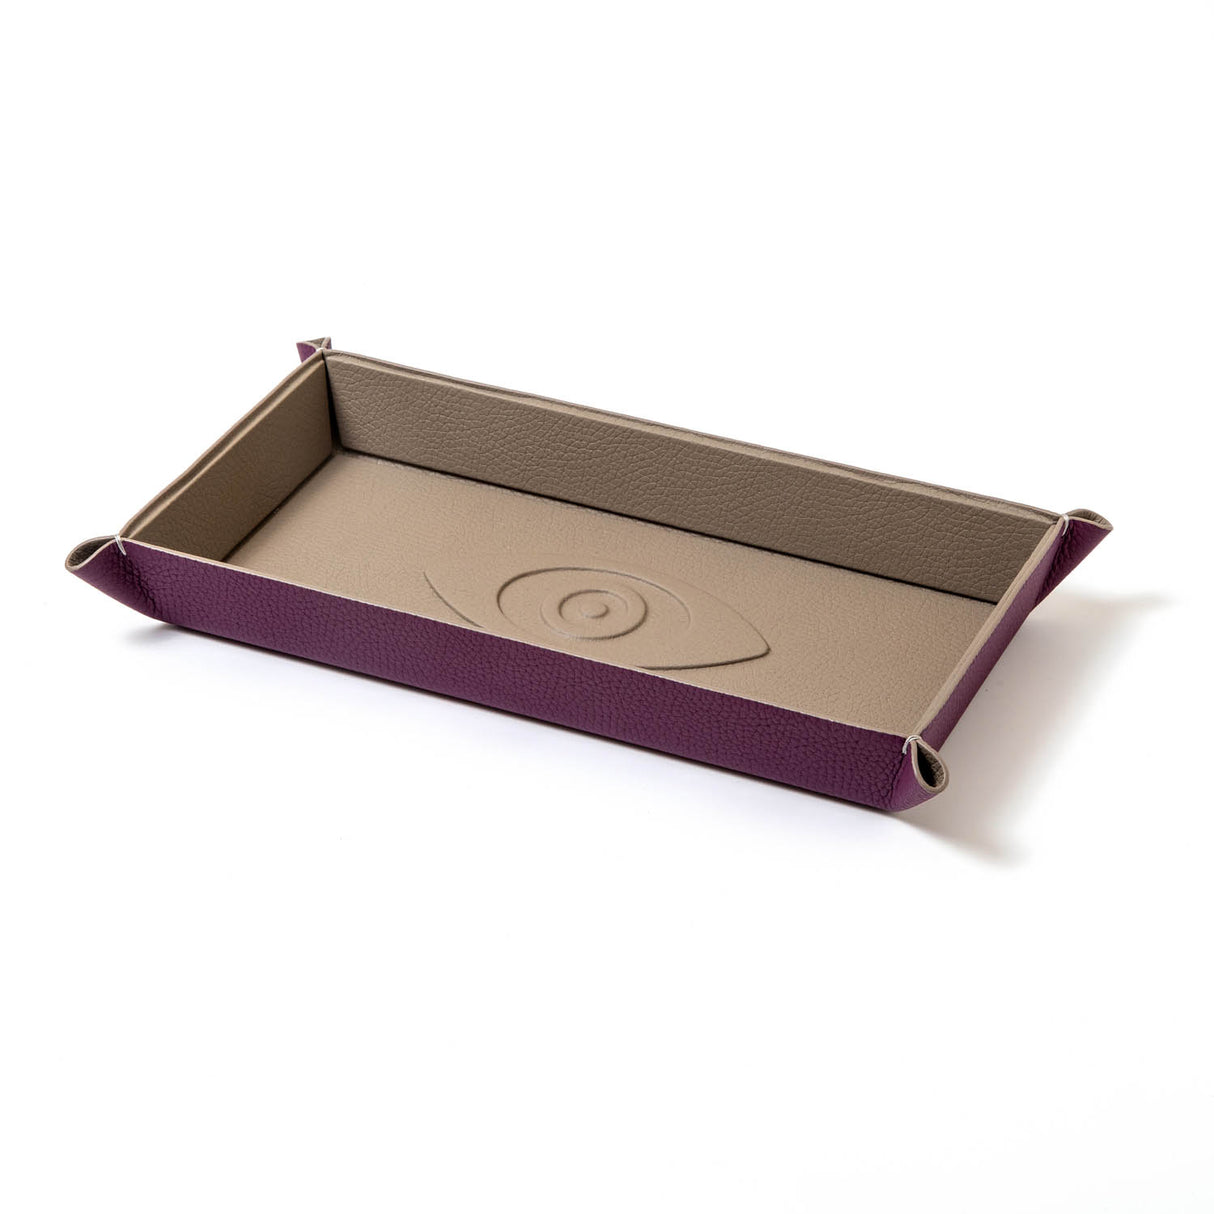 Madame Malachite Talisman Vide Poche Trays Tidy up your desk or coffee table with our new talisman tray. 100% Leather